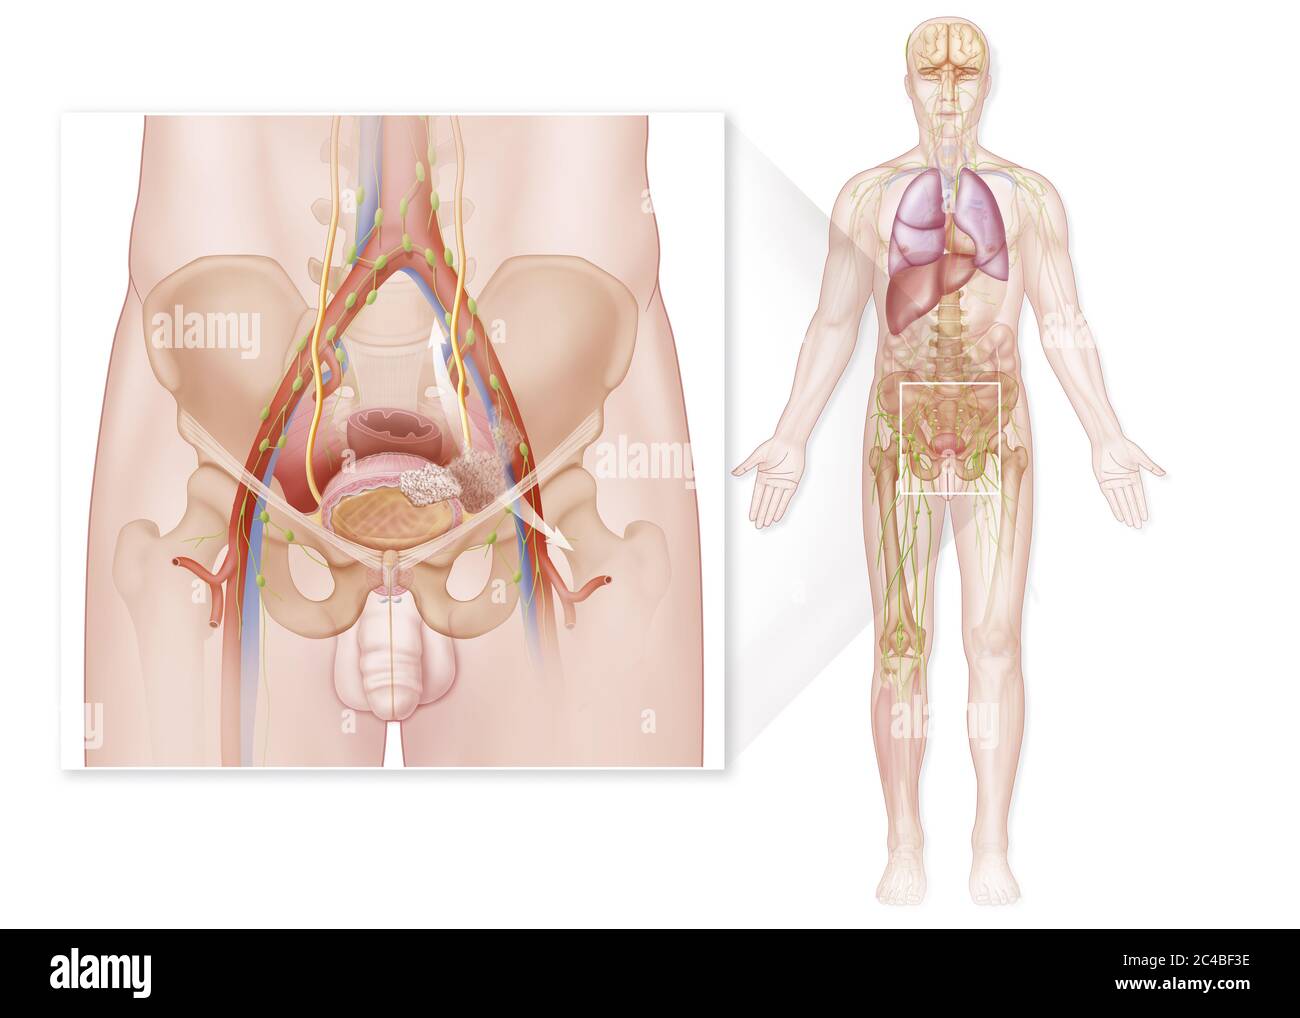 Stage IV bladder cancer in humans, tumor invasion with metastases. The illustration to the right of the drawing represents the general anatomy in a ma Stock Photo